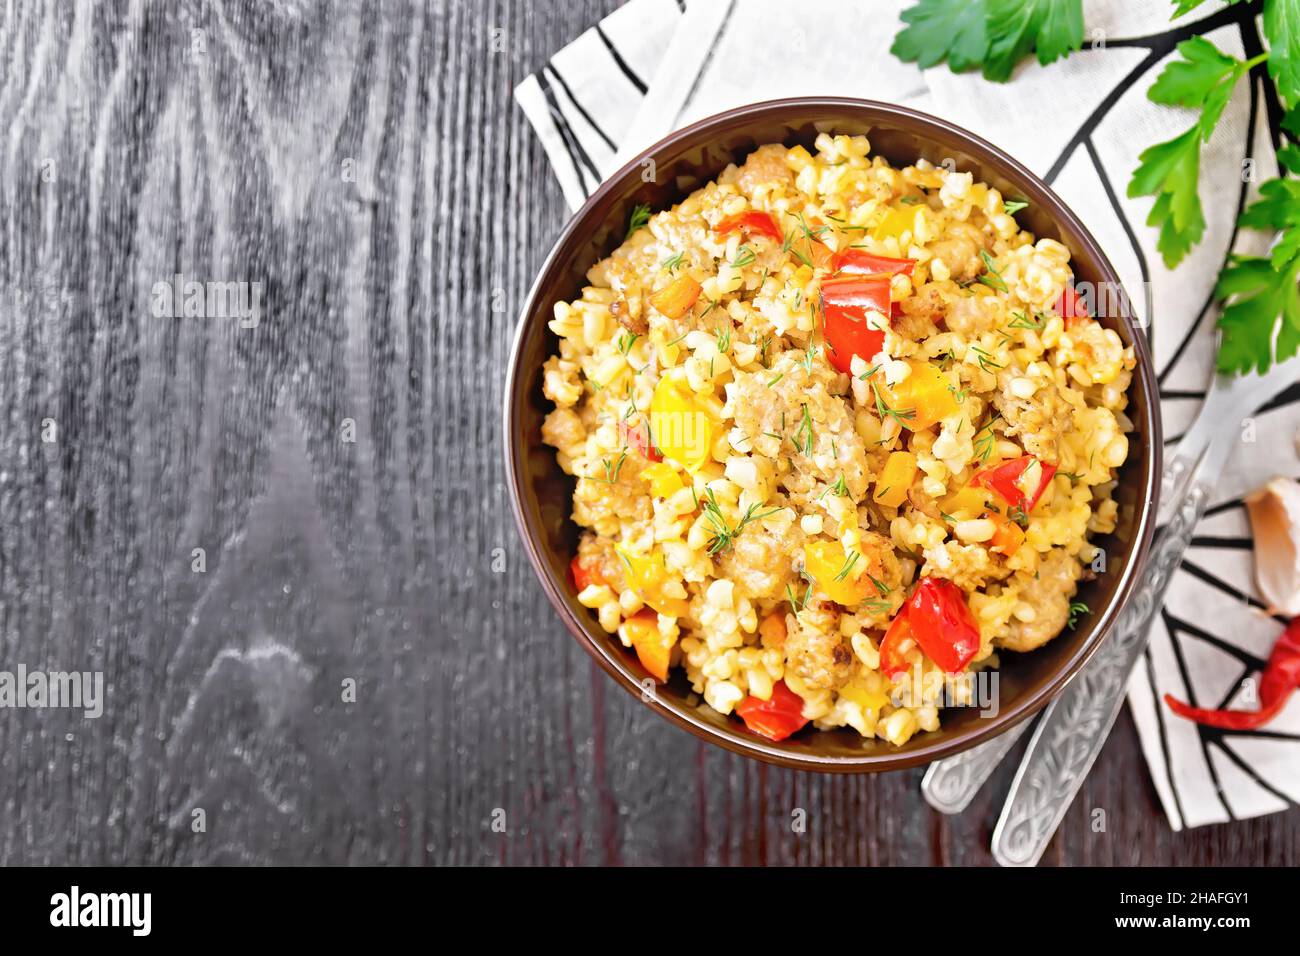 Barley porridge with minced meat, yellow and red bell peppers, garlic and onions in a clay bowl, napkin and parsley on wooden board background from ab Stock Photo